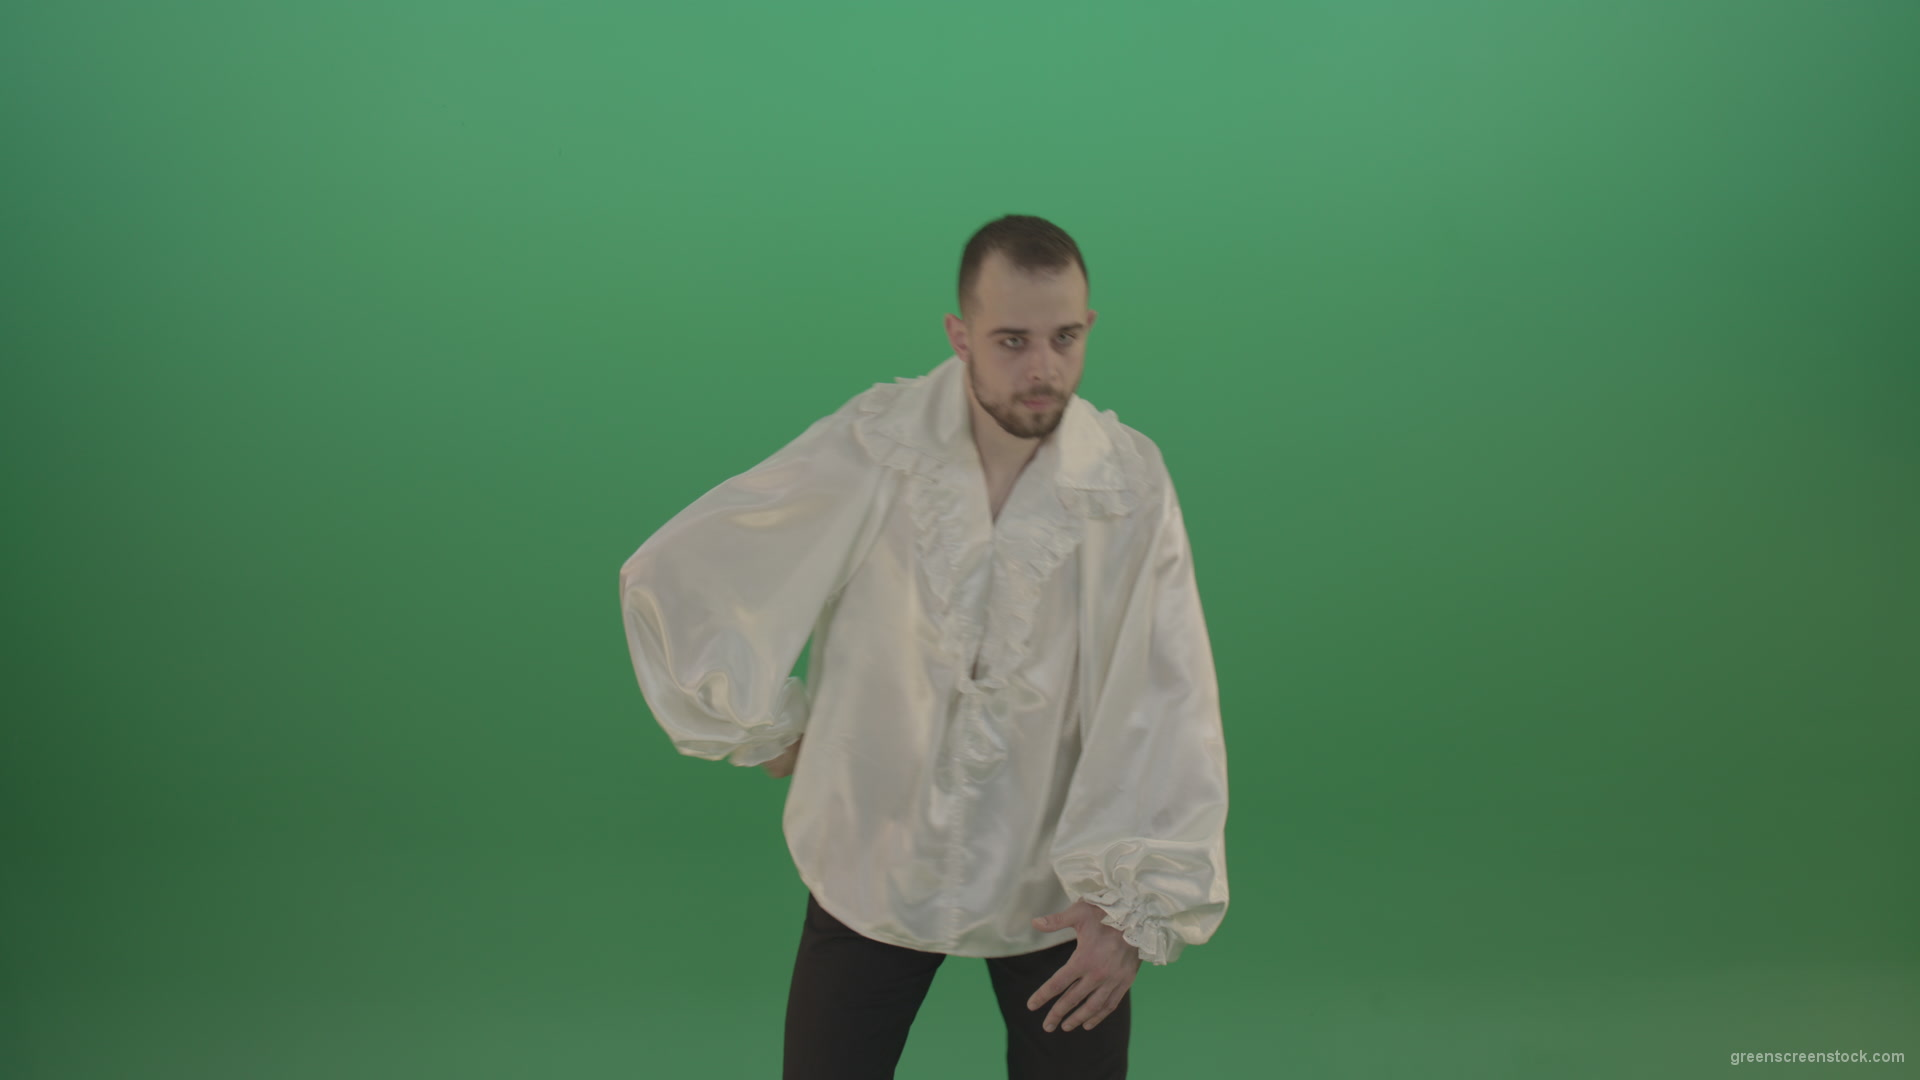 Man-in-white-shirt-shooting-with-pistol-hand-gun-isolated-in-green-screen-studio_002 Green Screen Stock